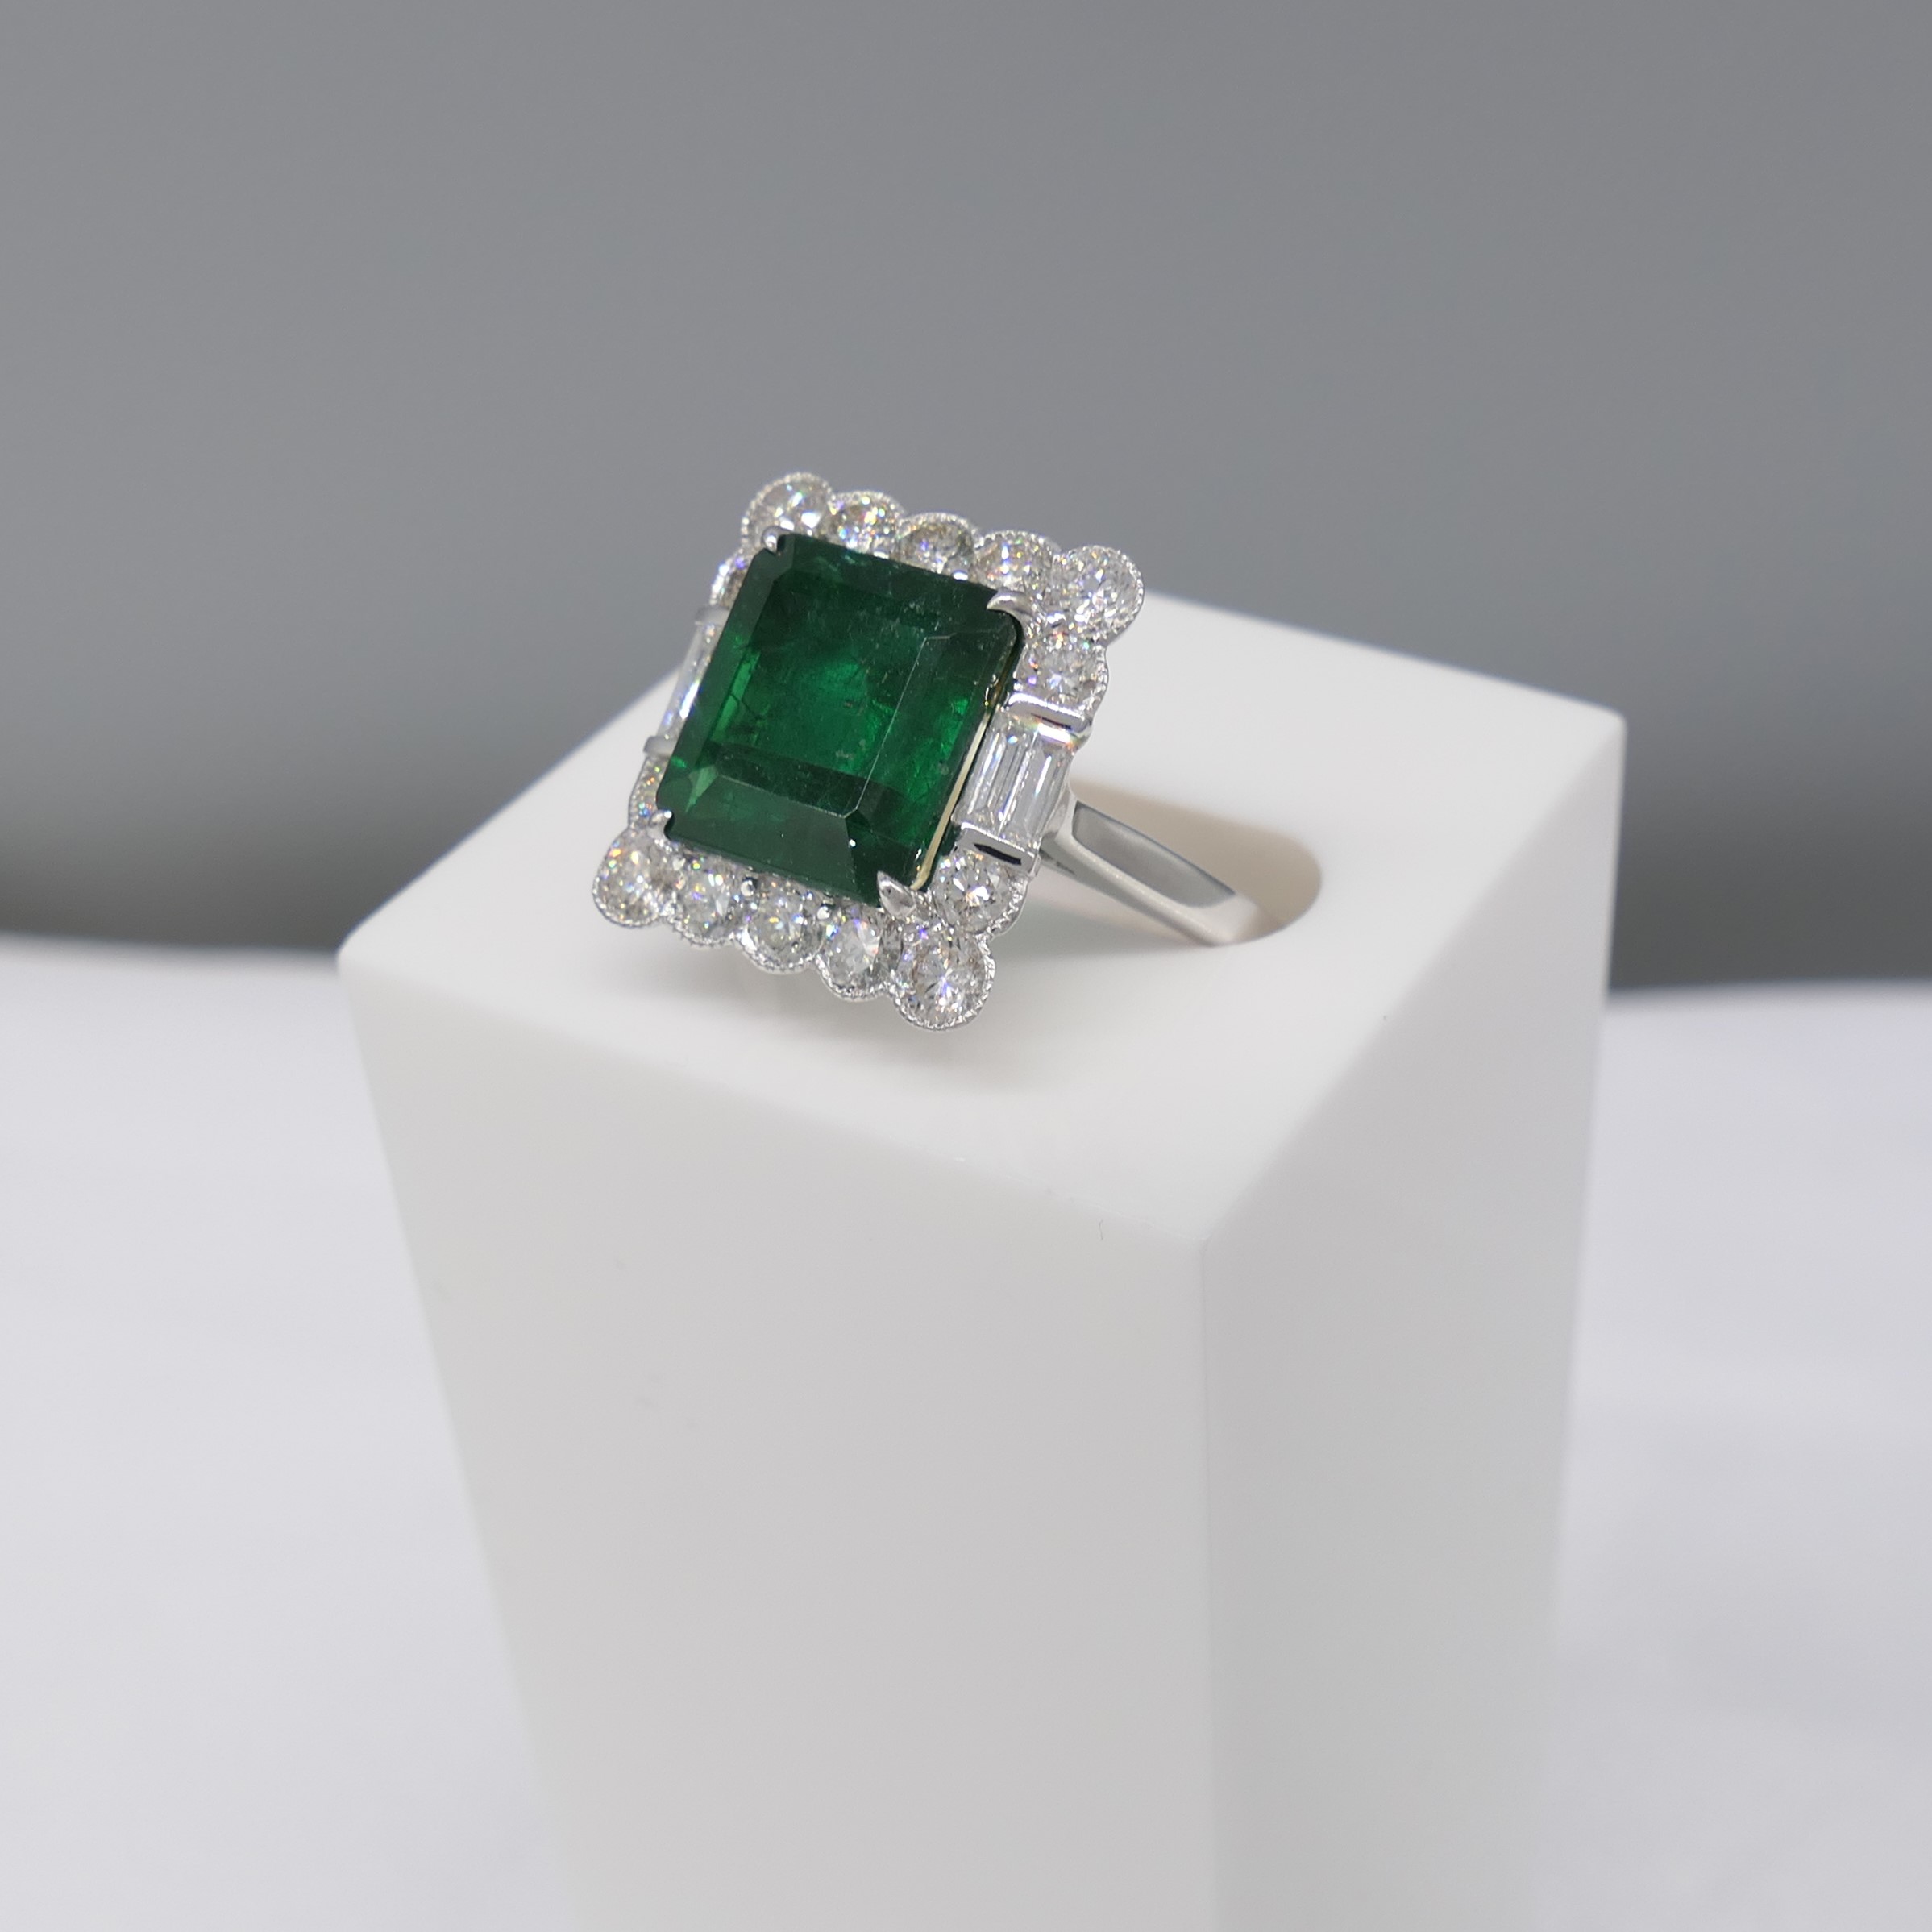 18ct White Gold Cocktail Ring Set With A Large Emerald and Diamonds